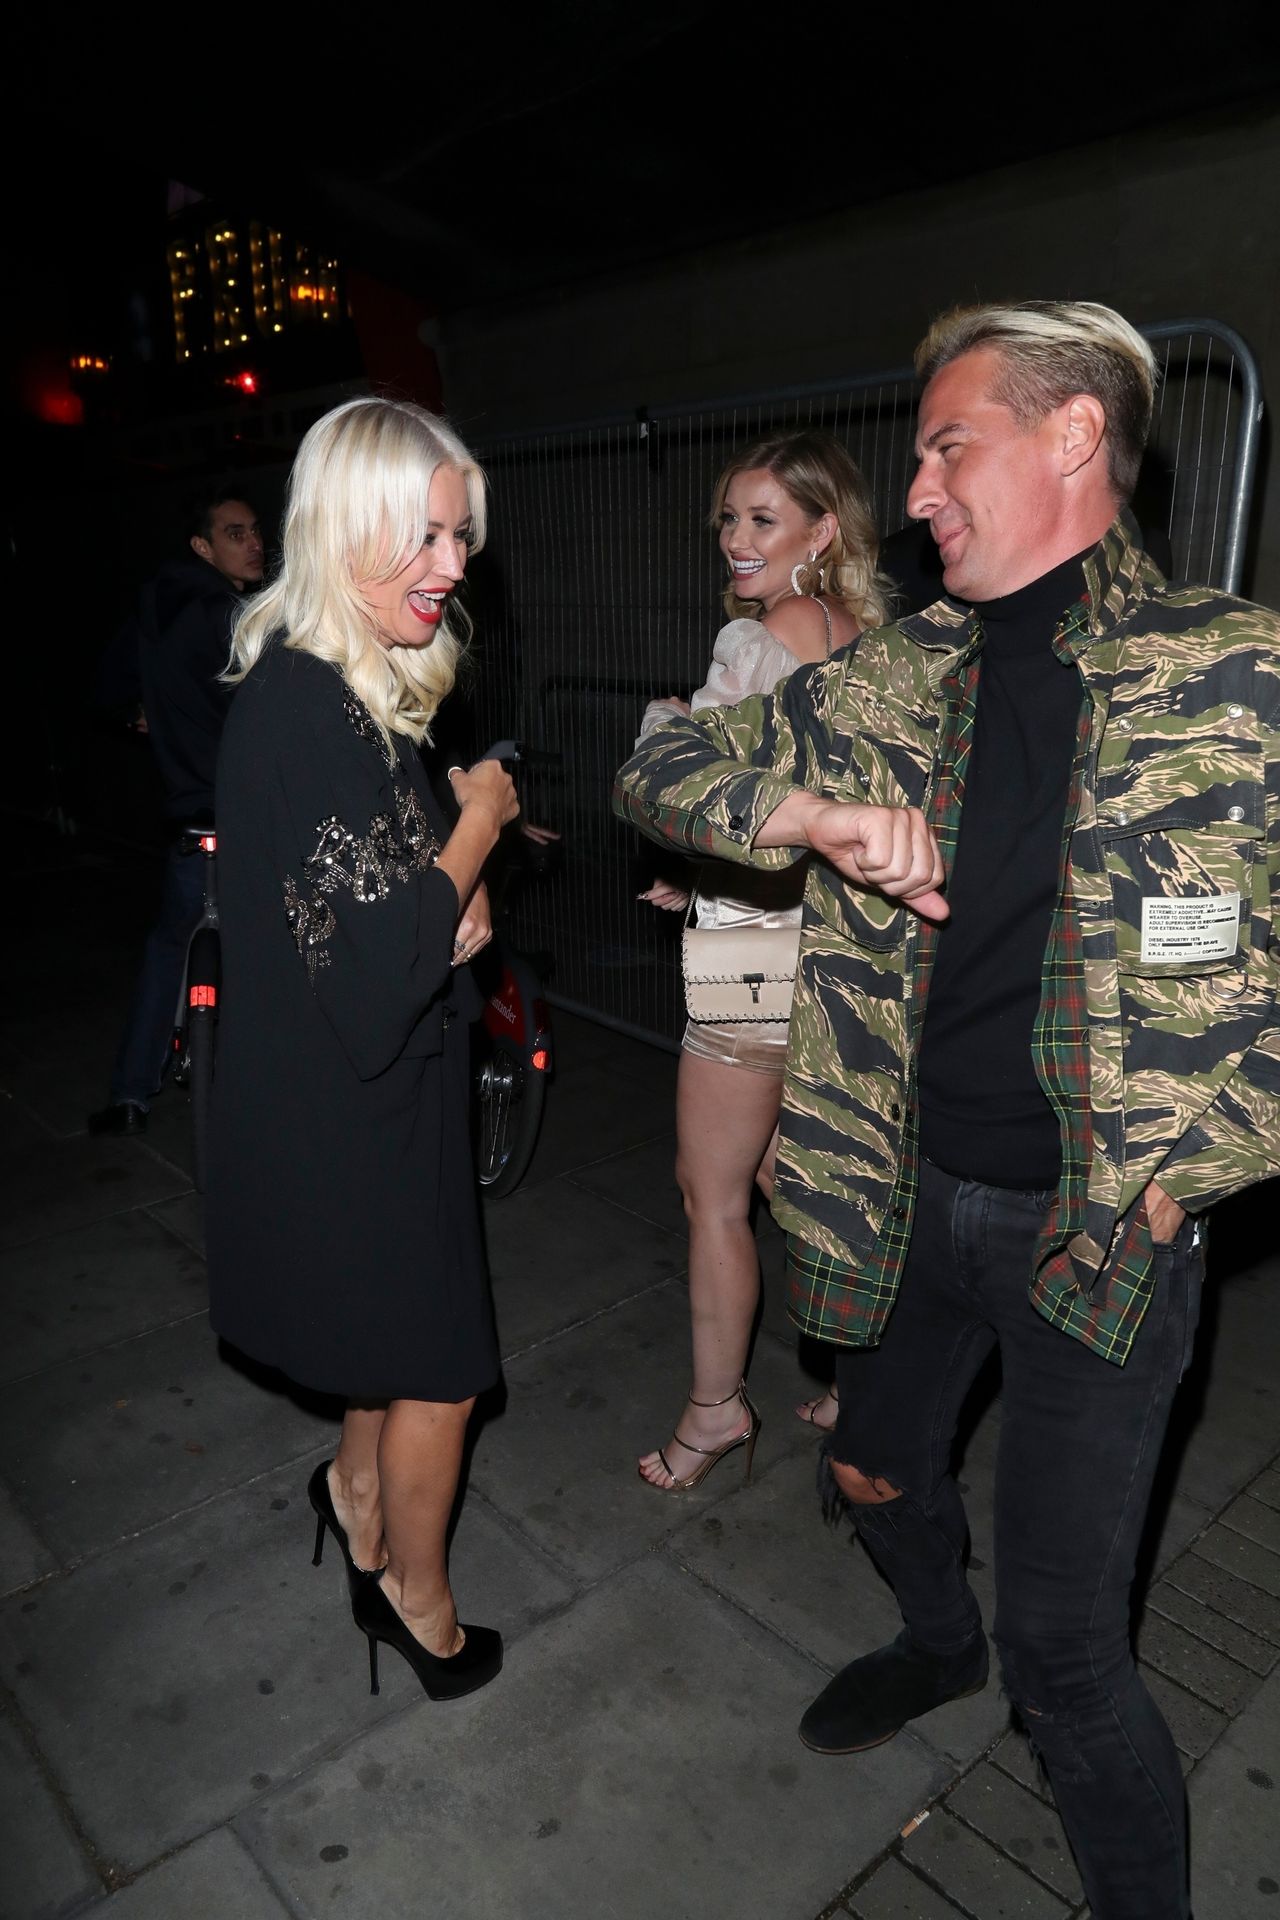 Amy Hart & Denise Van Outen are Pictured at Cabaret All Stars Show (81 Photos)